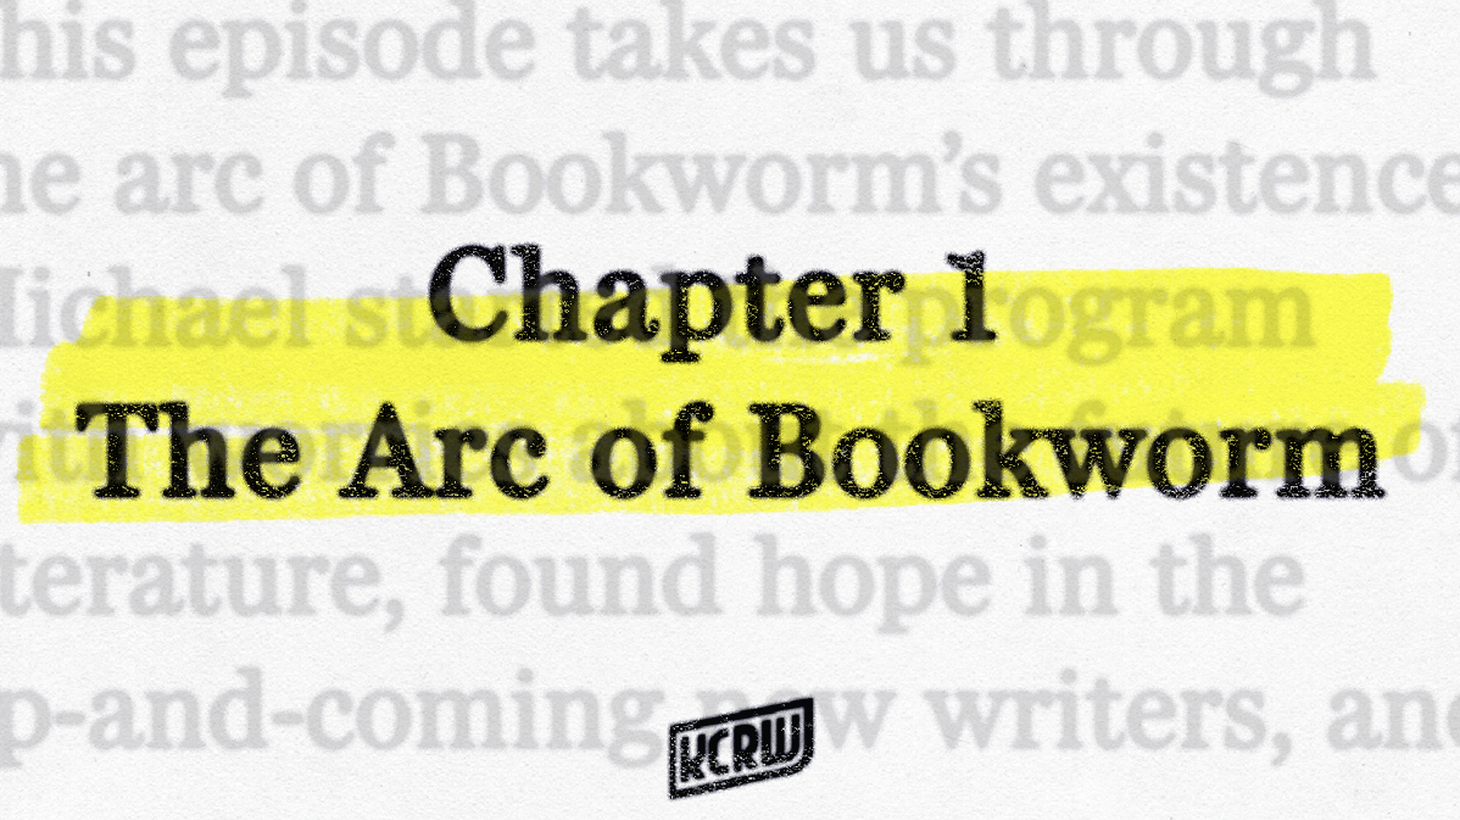 This episode takes us through the arc of Bookworm’s existence: Michael started the program with worries about the future of literature, found hope in the up-and-coming new writers, and proceeded to highlight authors of diverse backgrounds, cultures, and geographies.